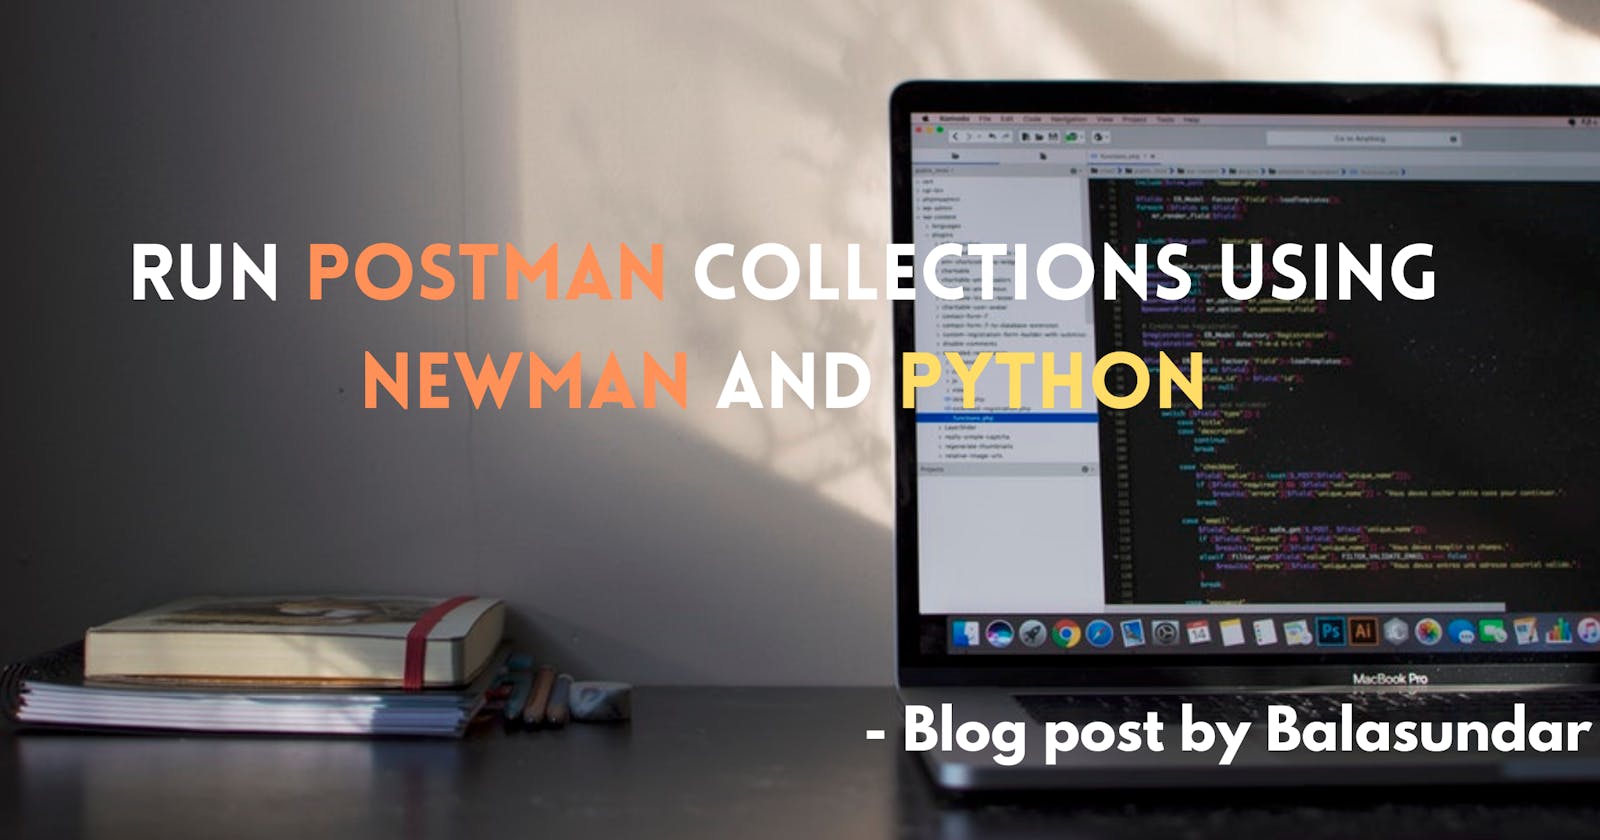 Run Postman collections using Newman and Python